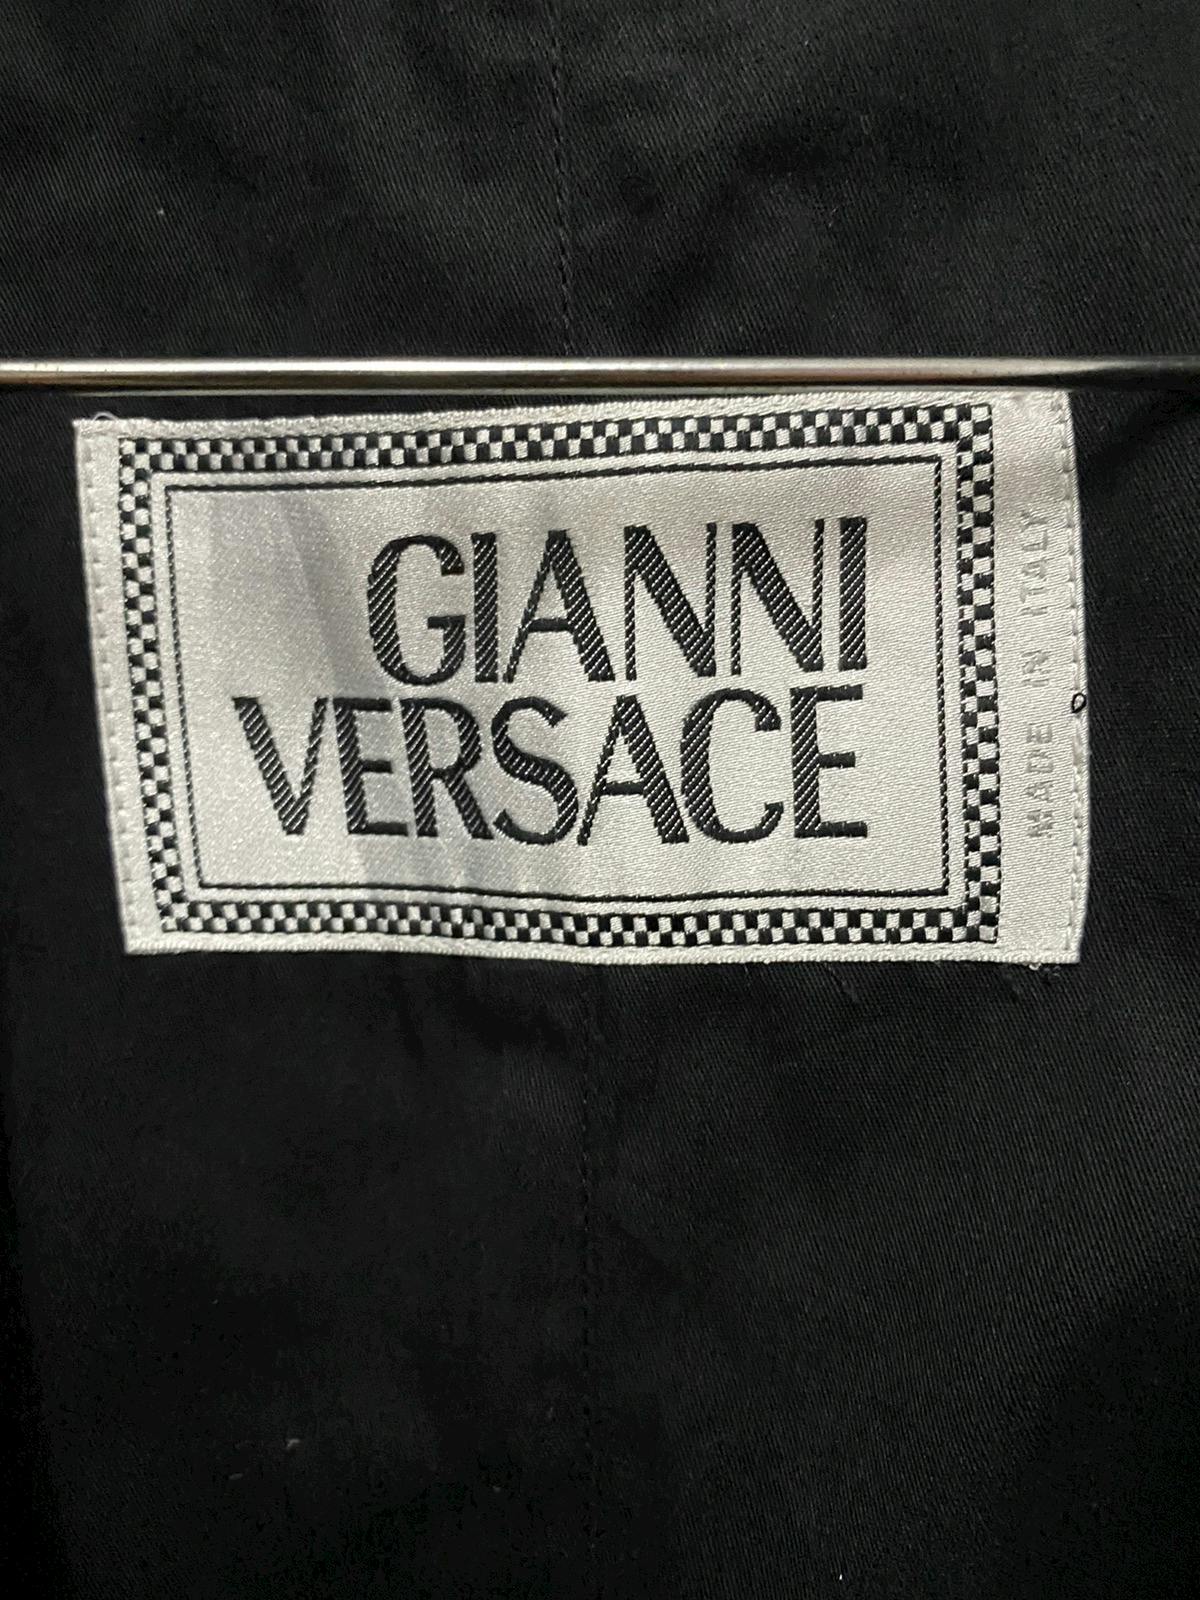 Vintage Gianni Versace Jacket Made in Italy - 7